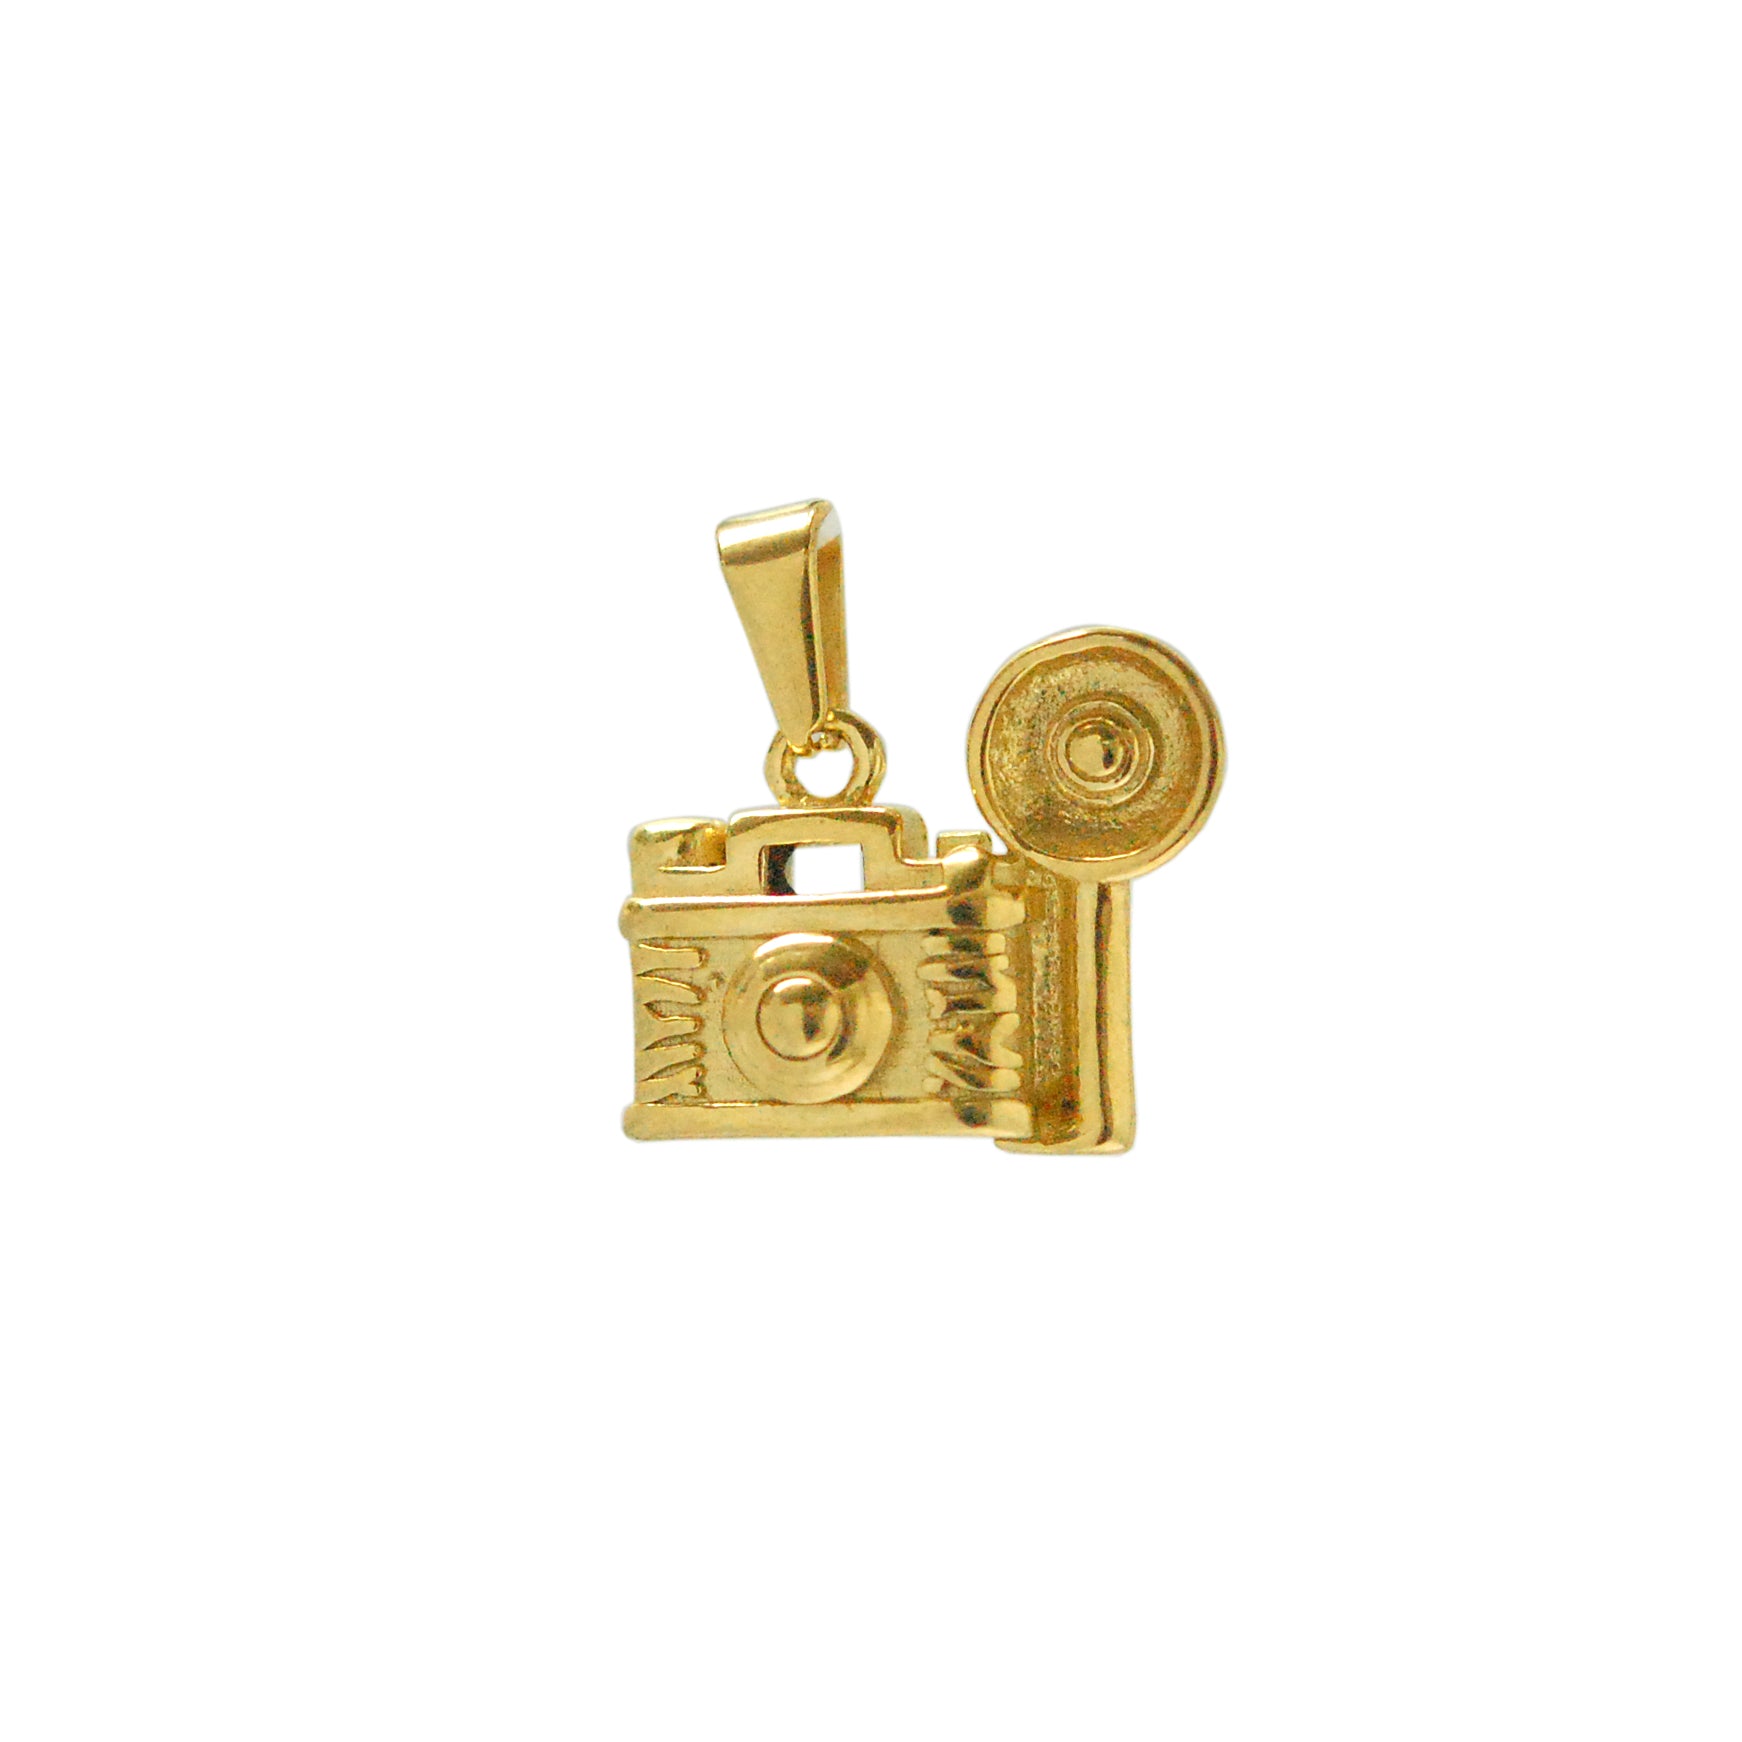 ESP 5761: Limited Edition Gold Plated Old Fashioned Camera Pendant